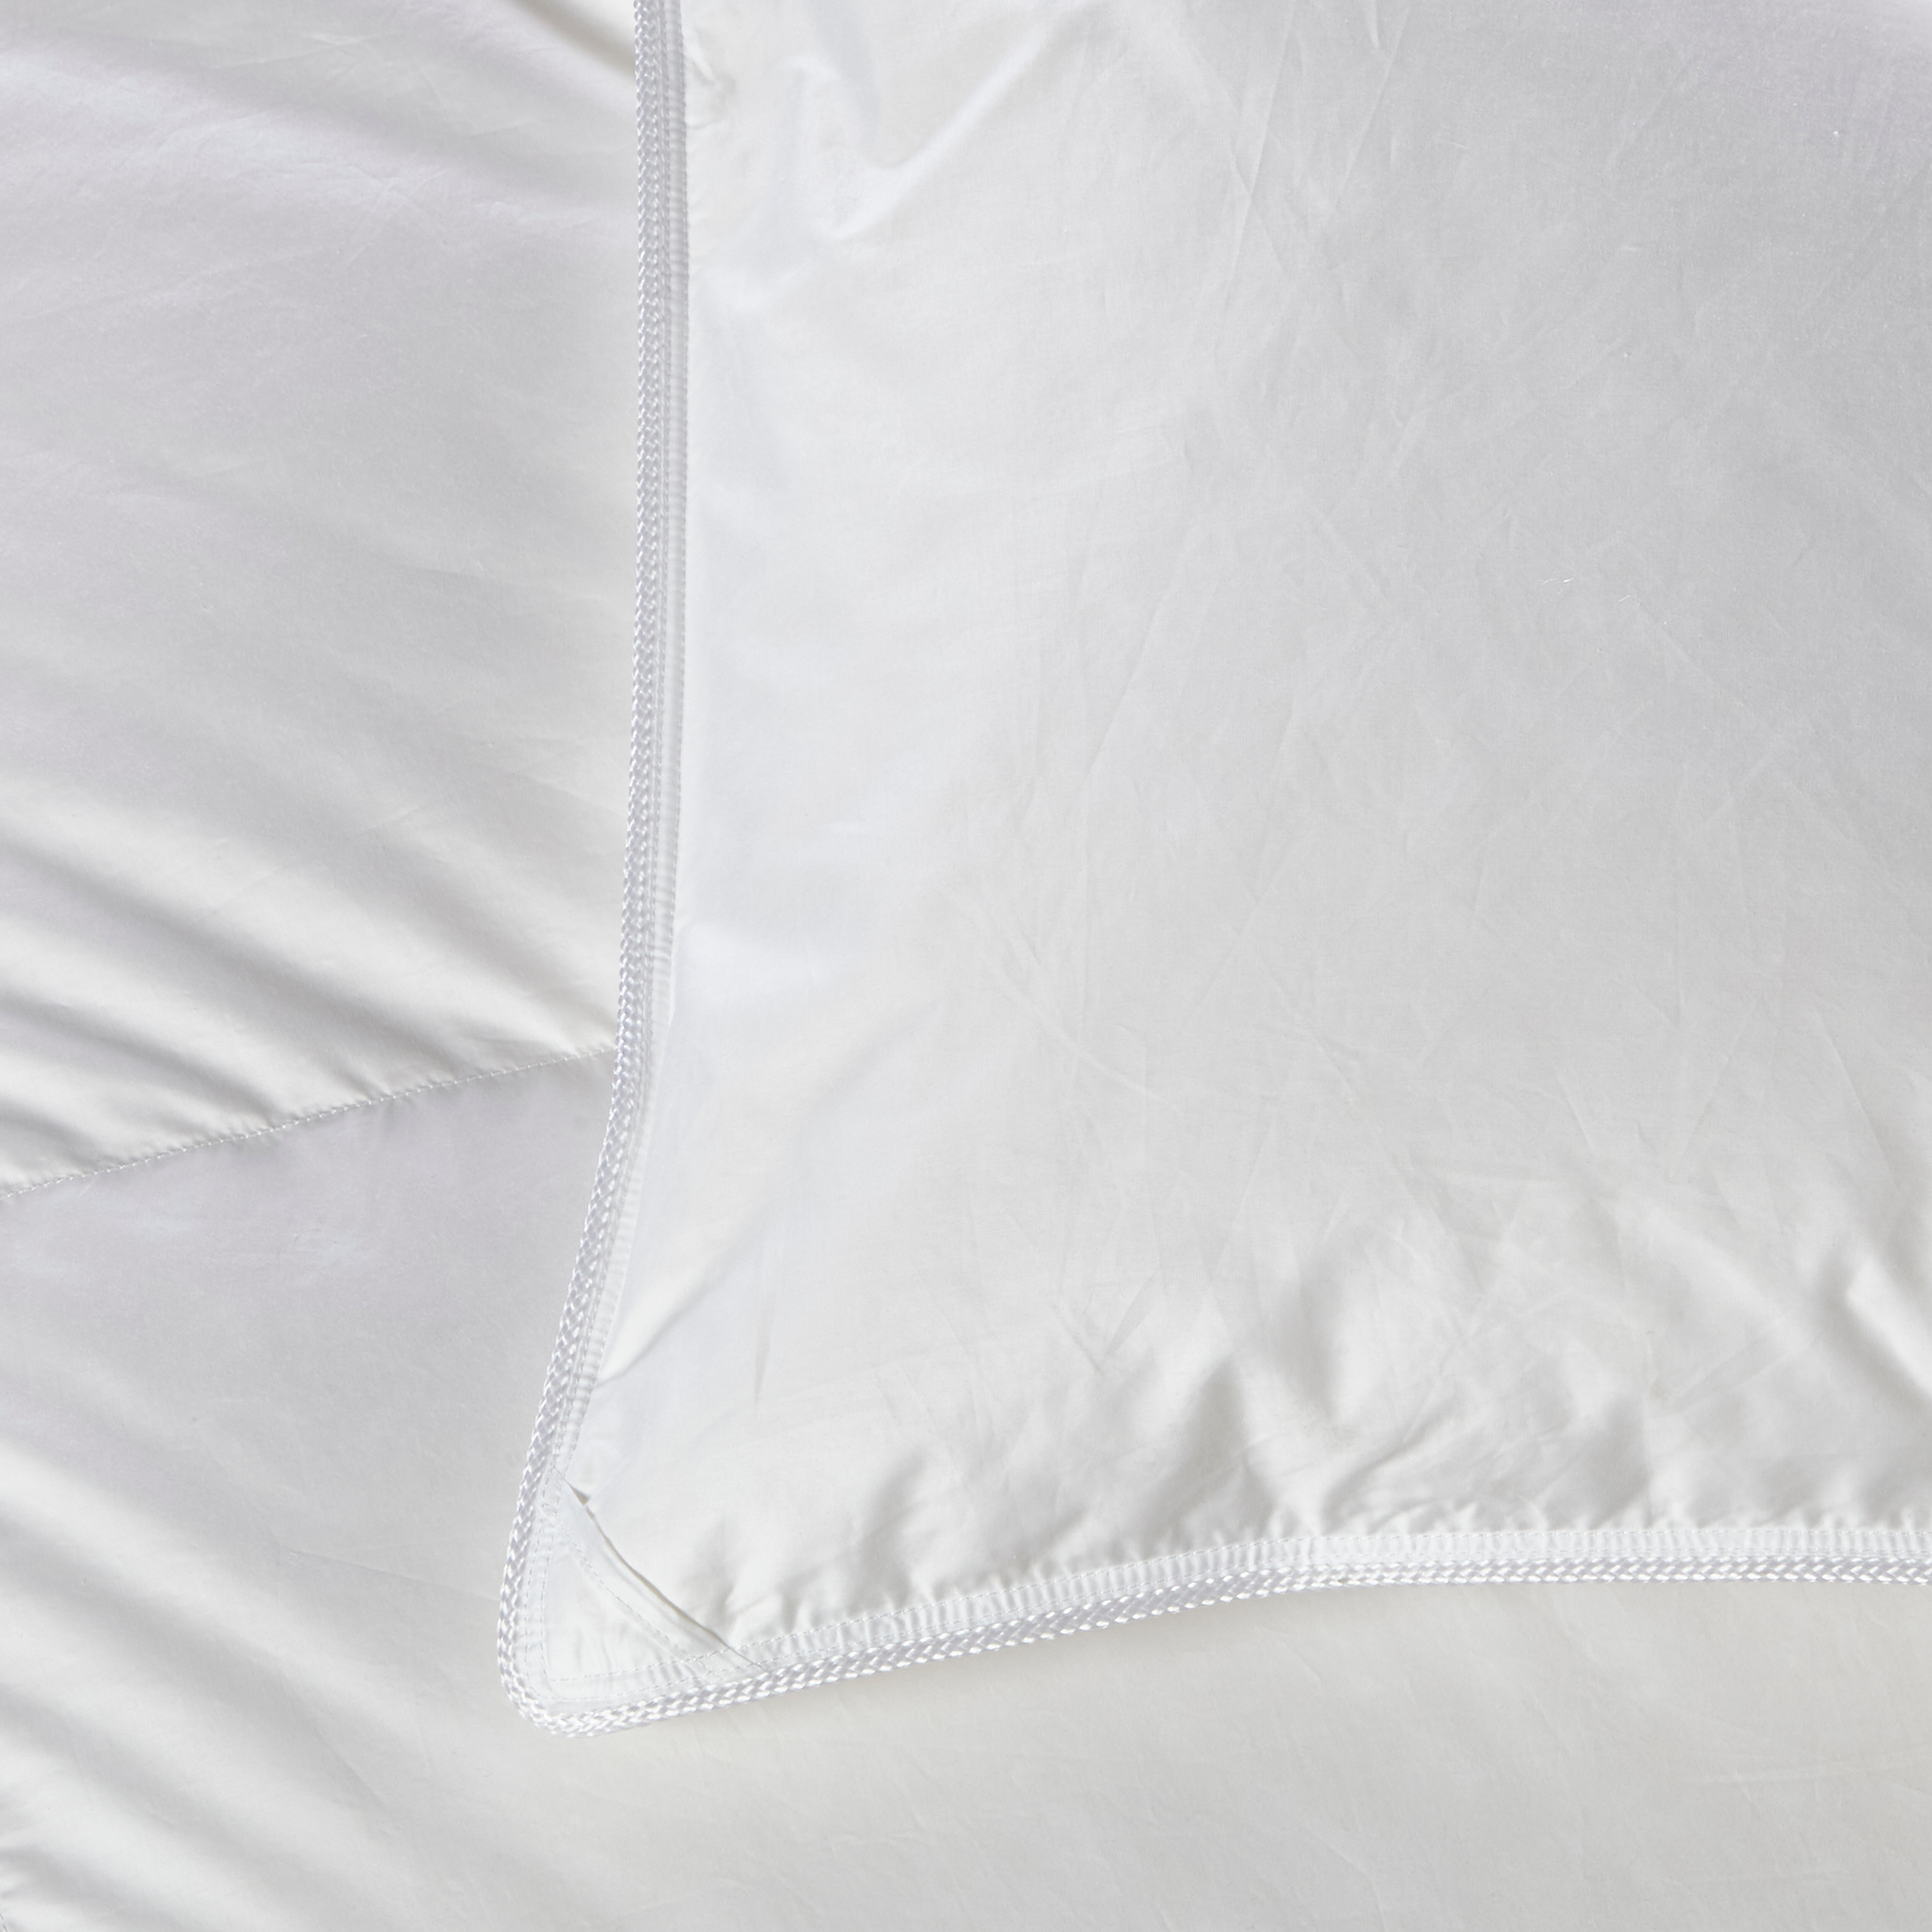 This luxurious duvet is made with white goose down - renowned worldwide for its outstanding insulation and fill power.